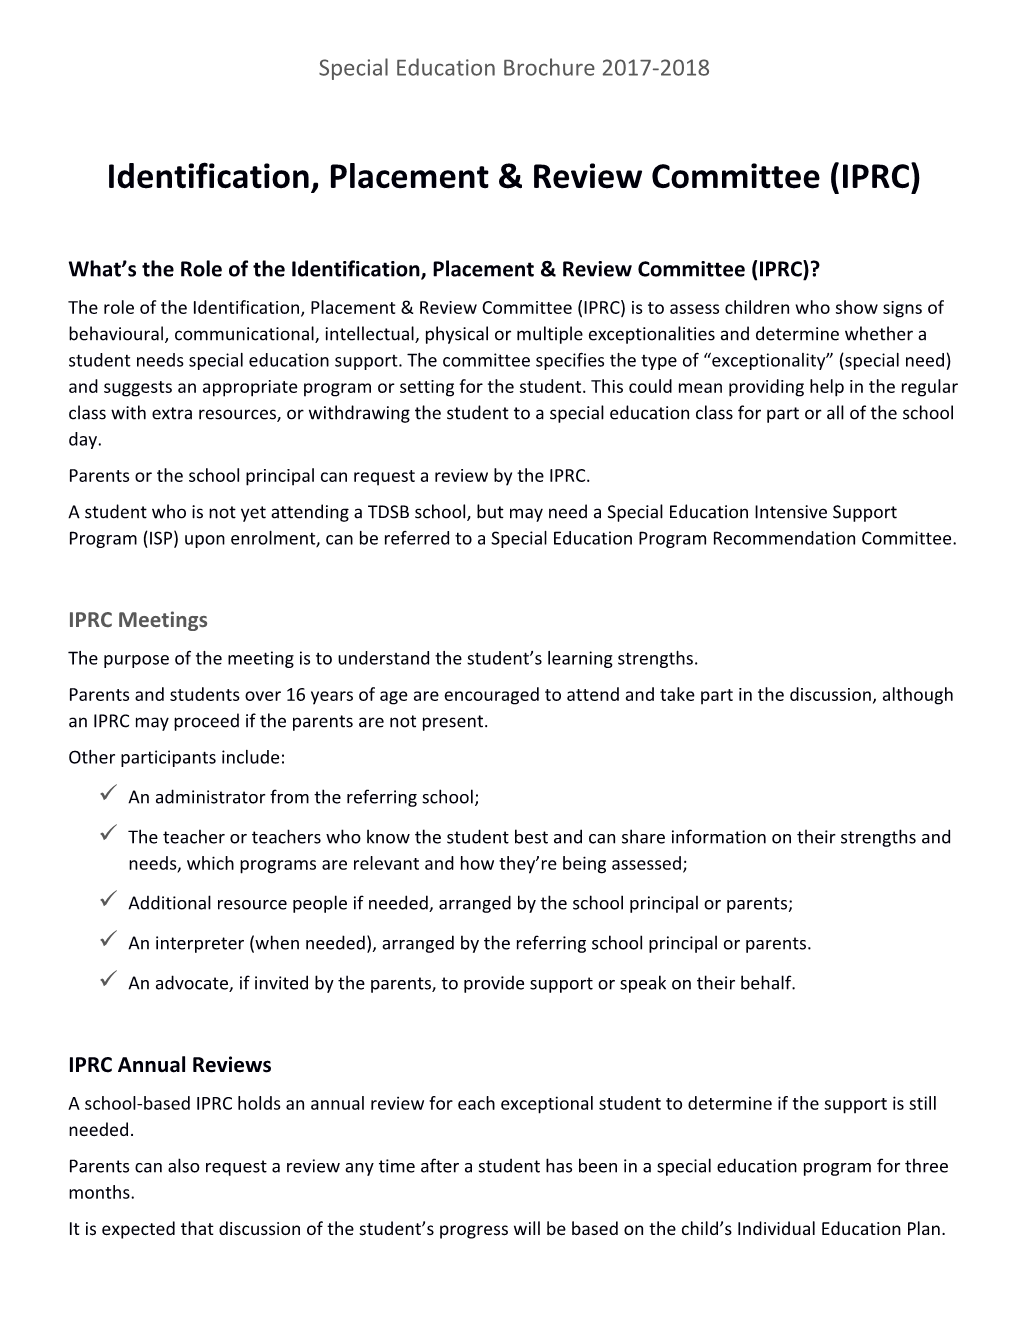 Identification, Placement & Review Committee (IPRC)